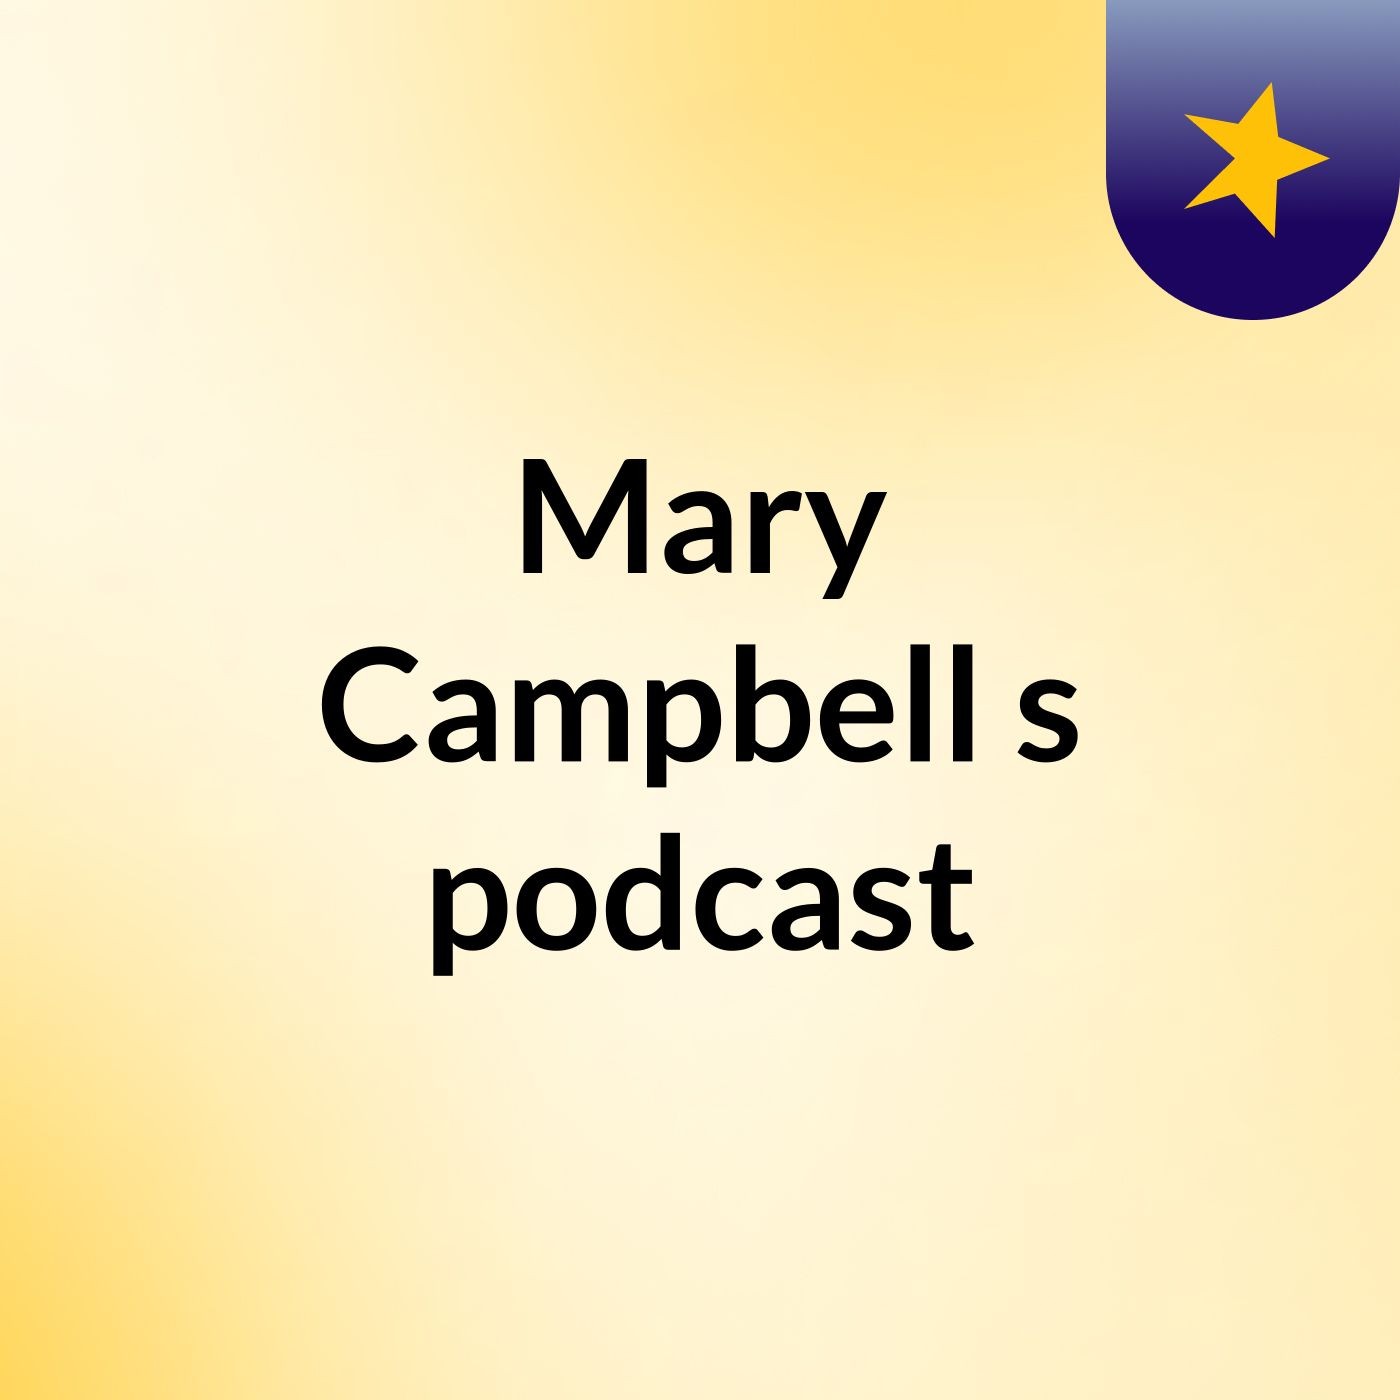 Mary Campbell's podcast